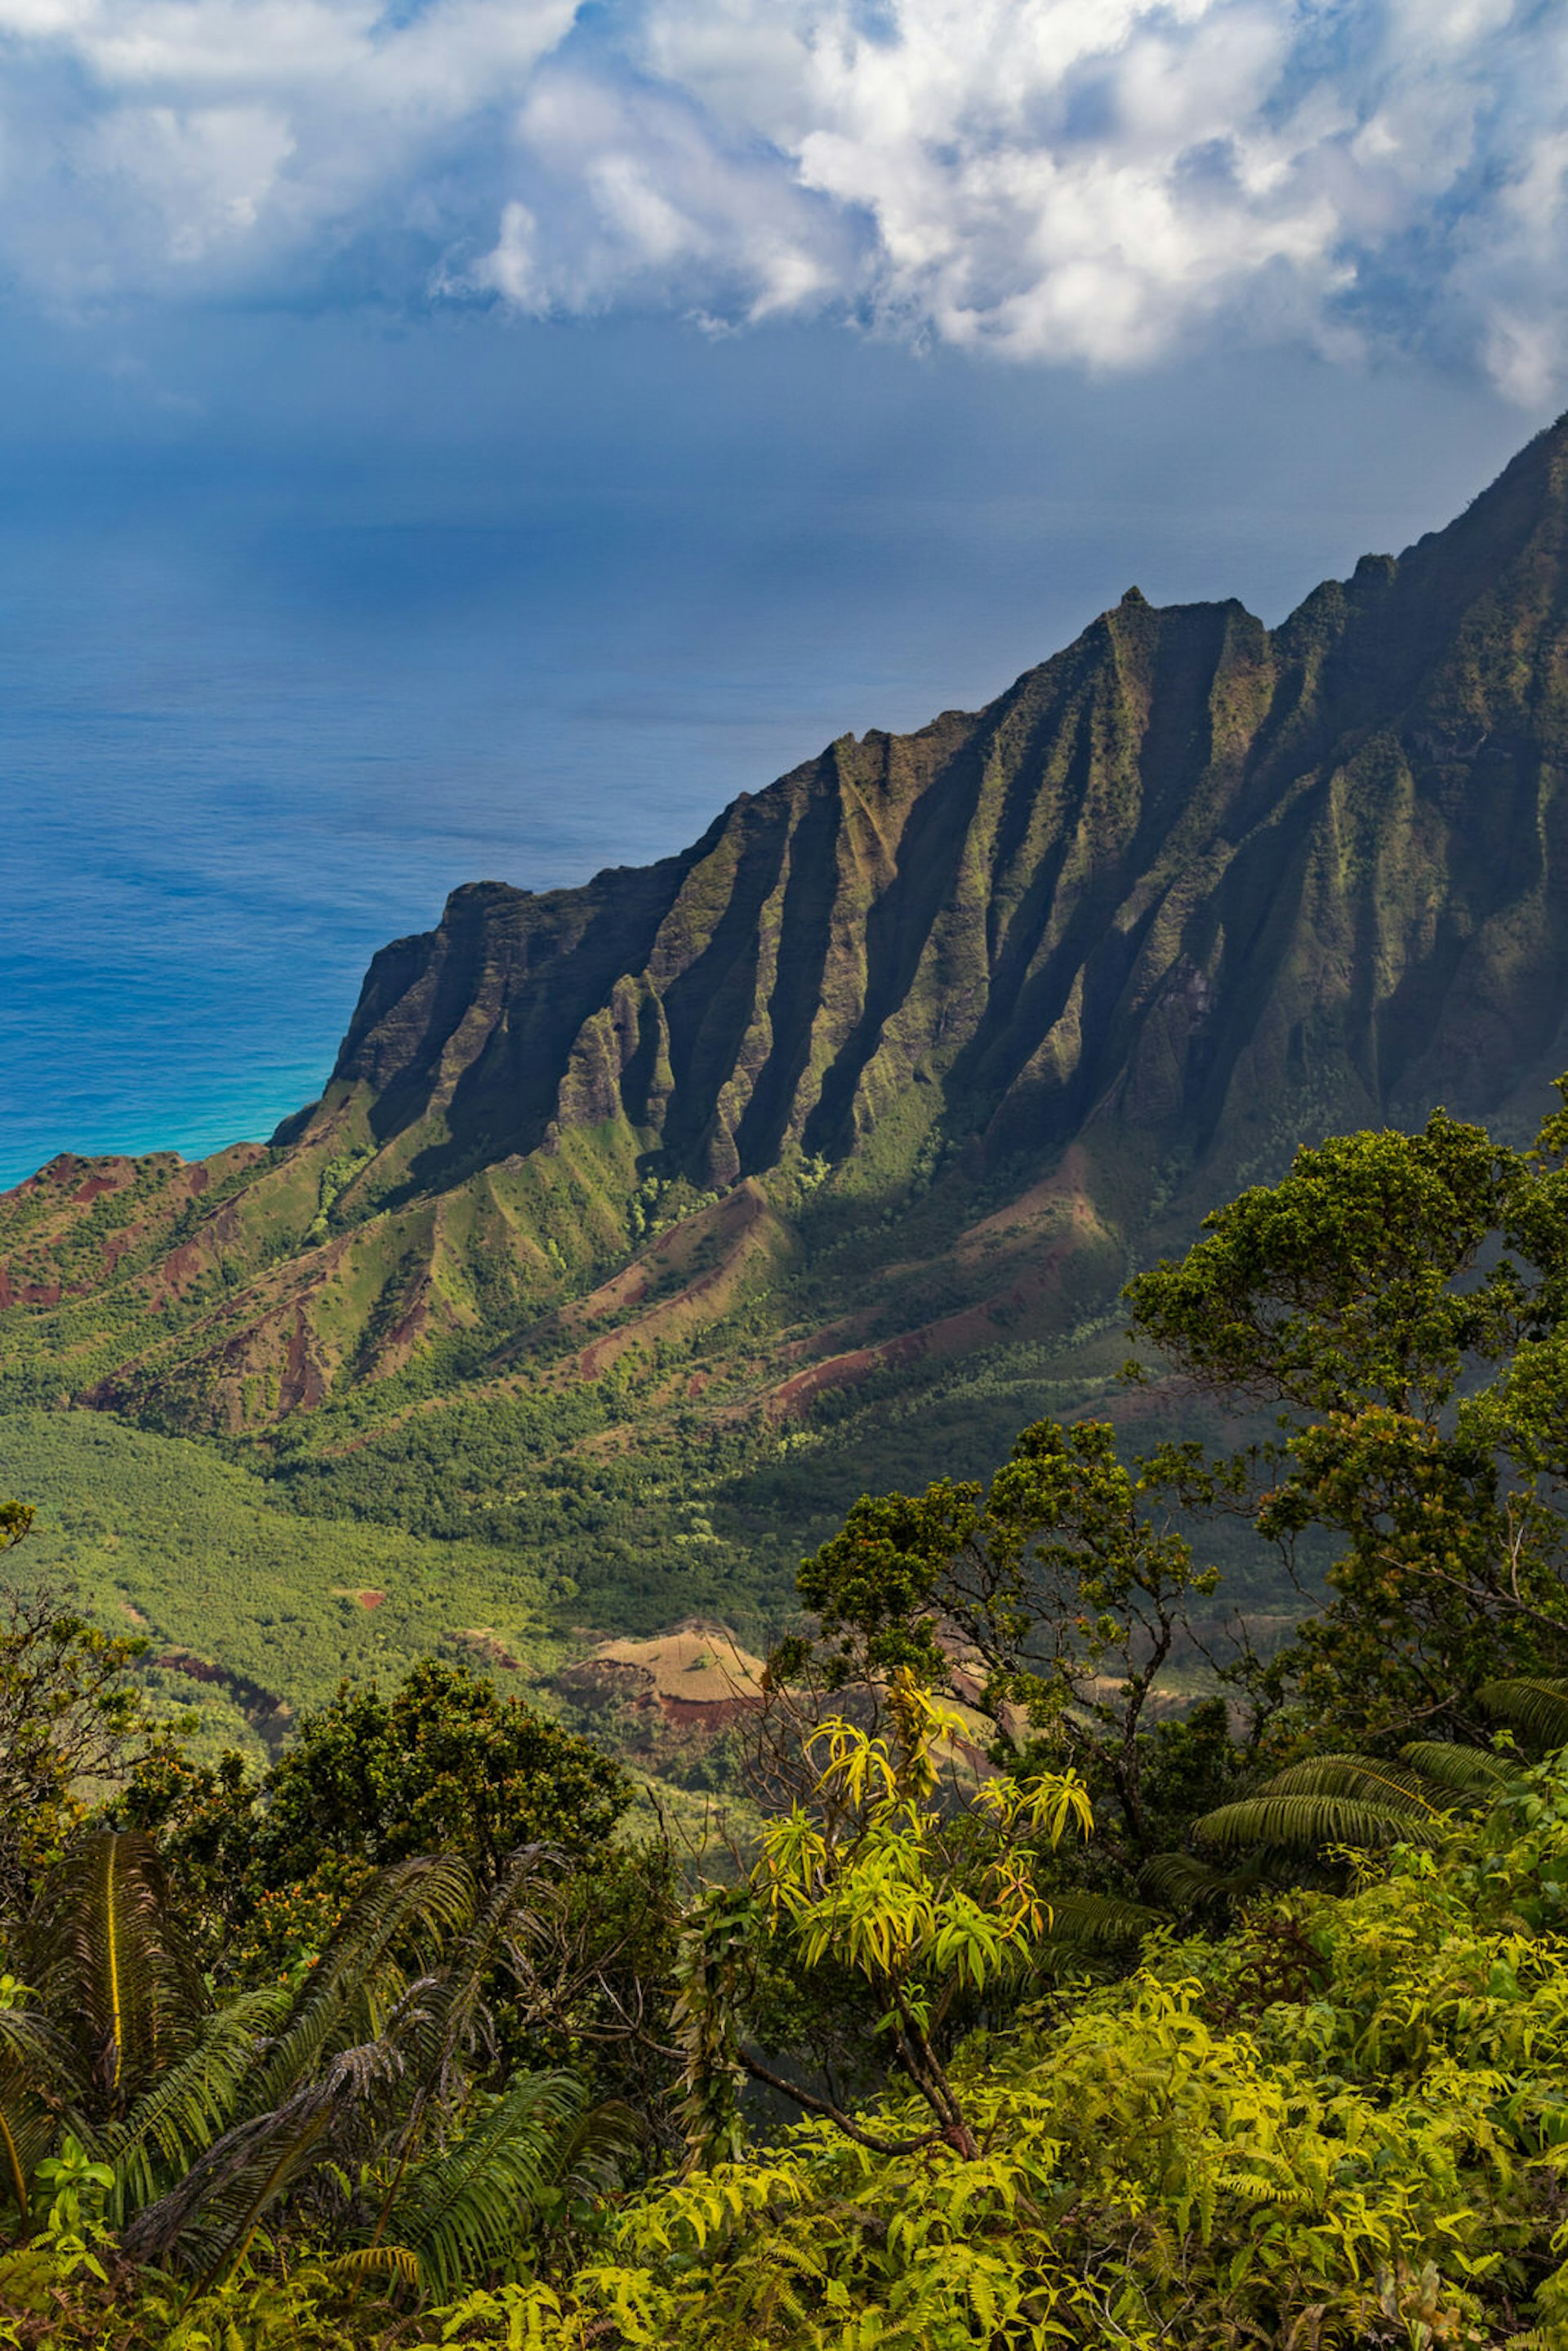 The view from Kalalau Lookout © Alexander Howard / Lonely Planet